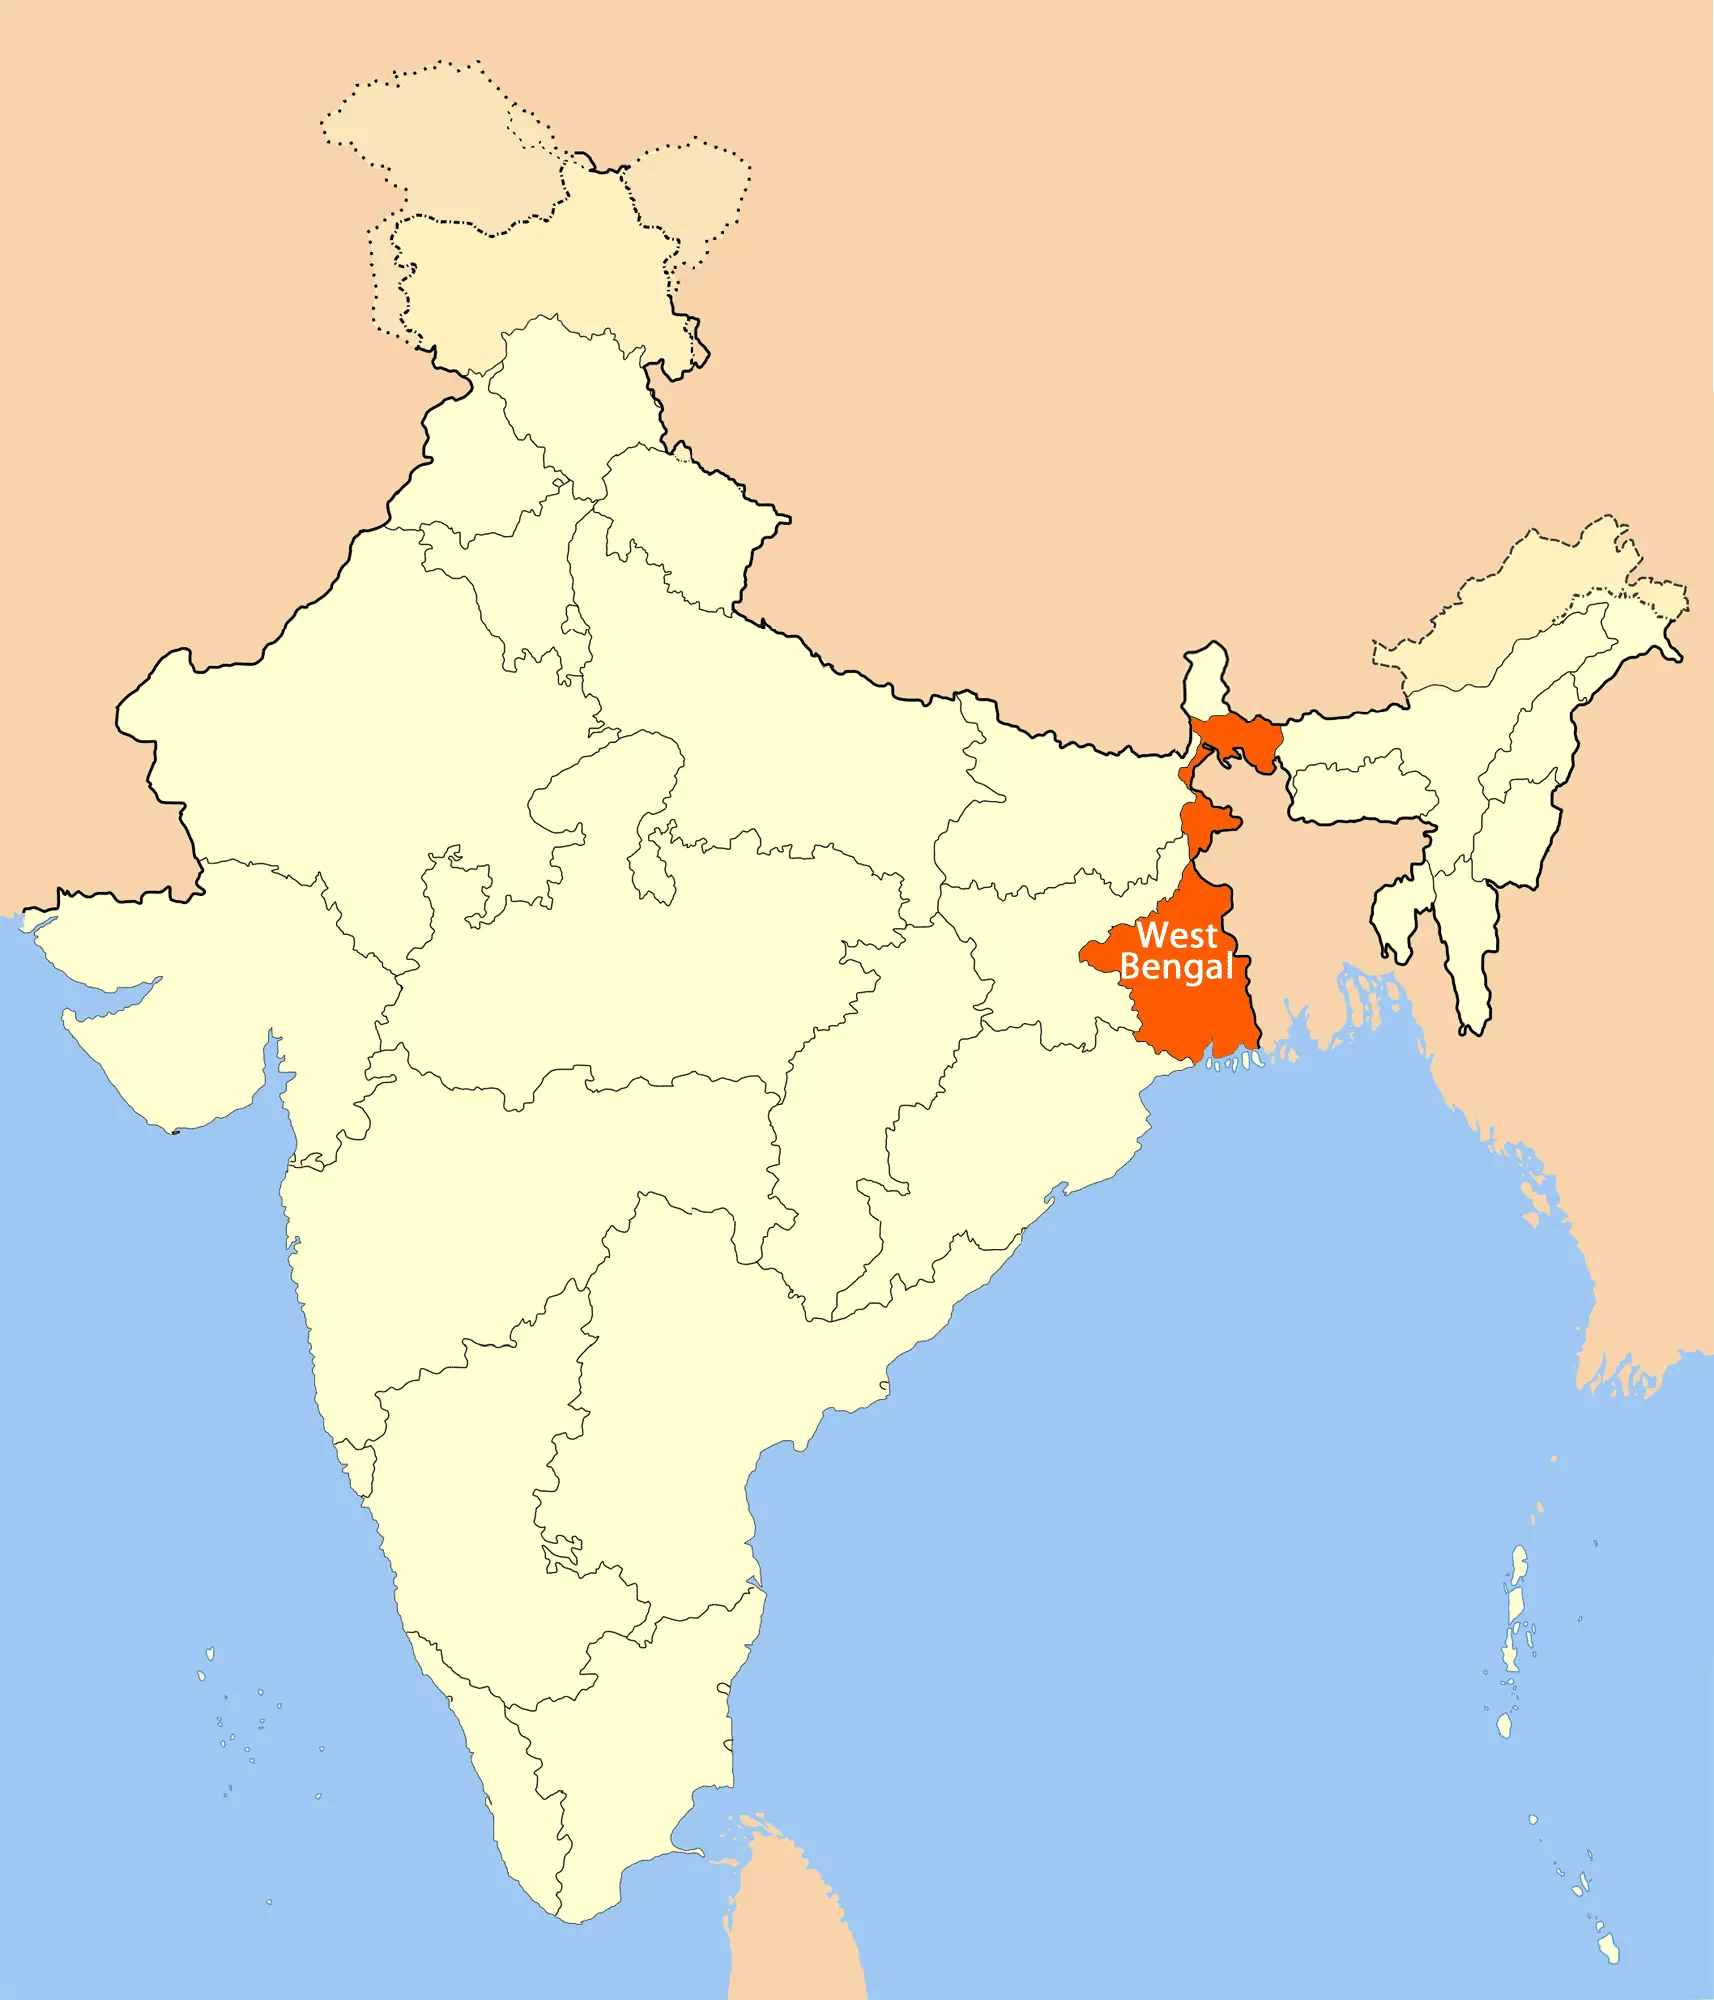 Location Map of West Bengal